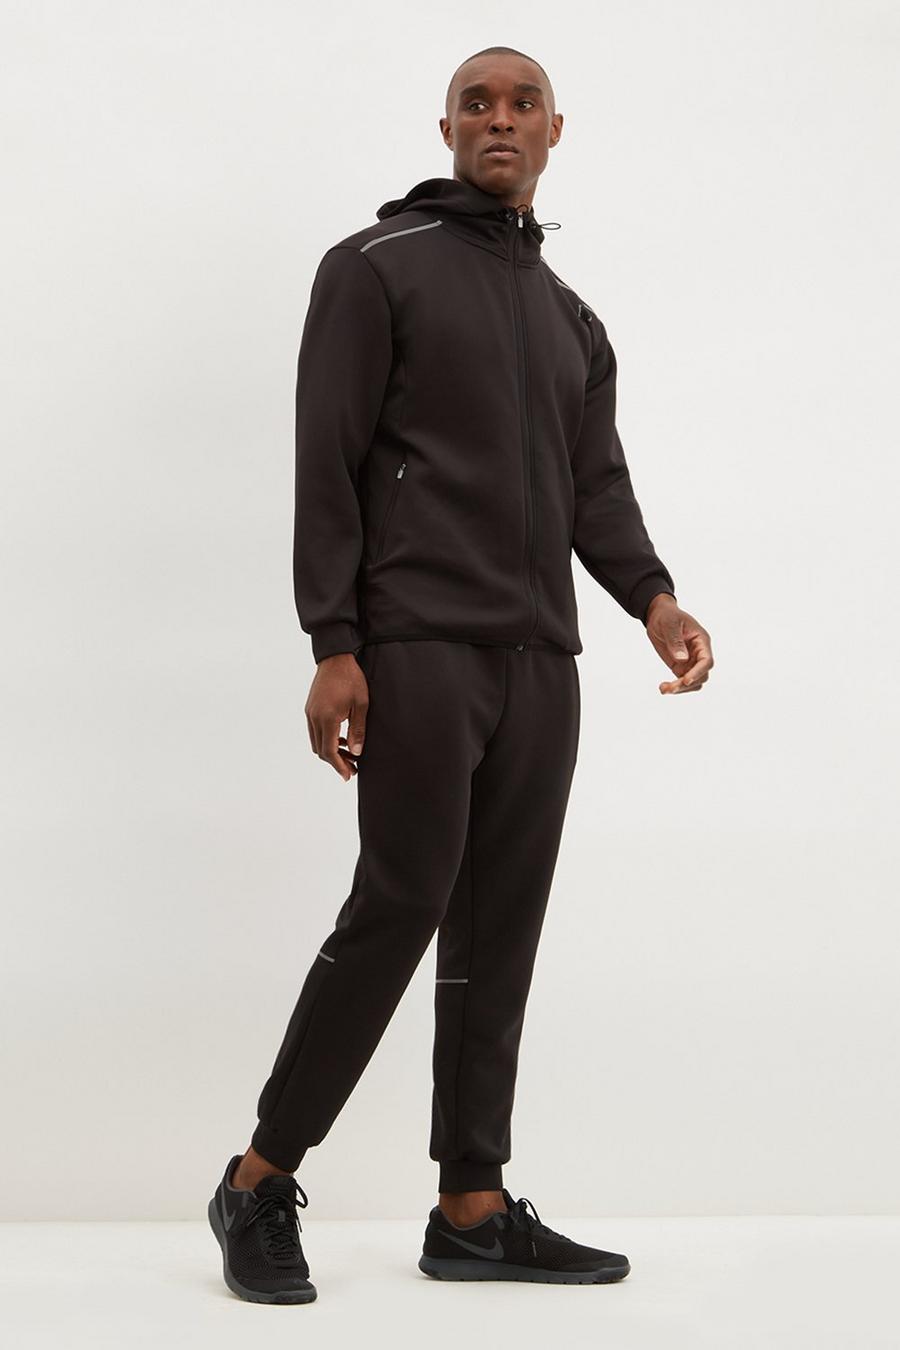 RTR Relaxed Fit Reflective Jogger